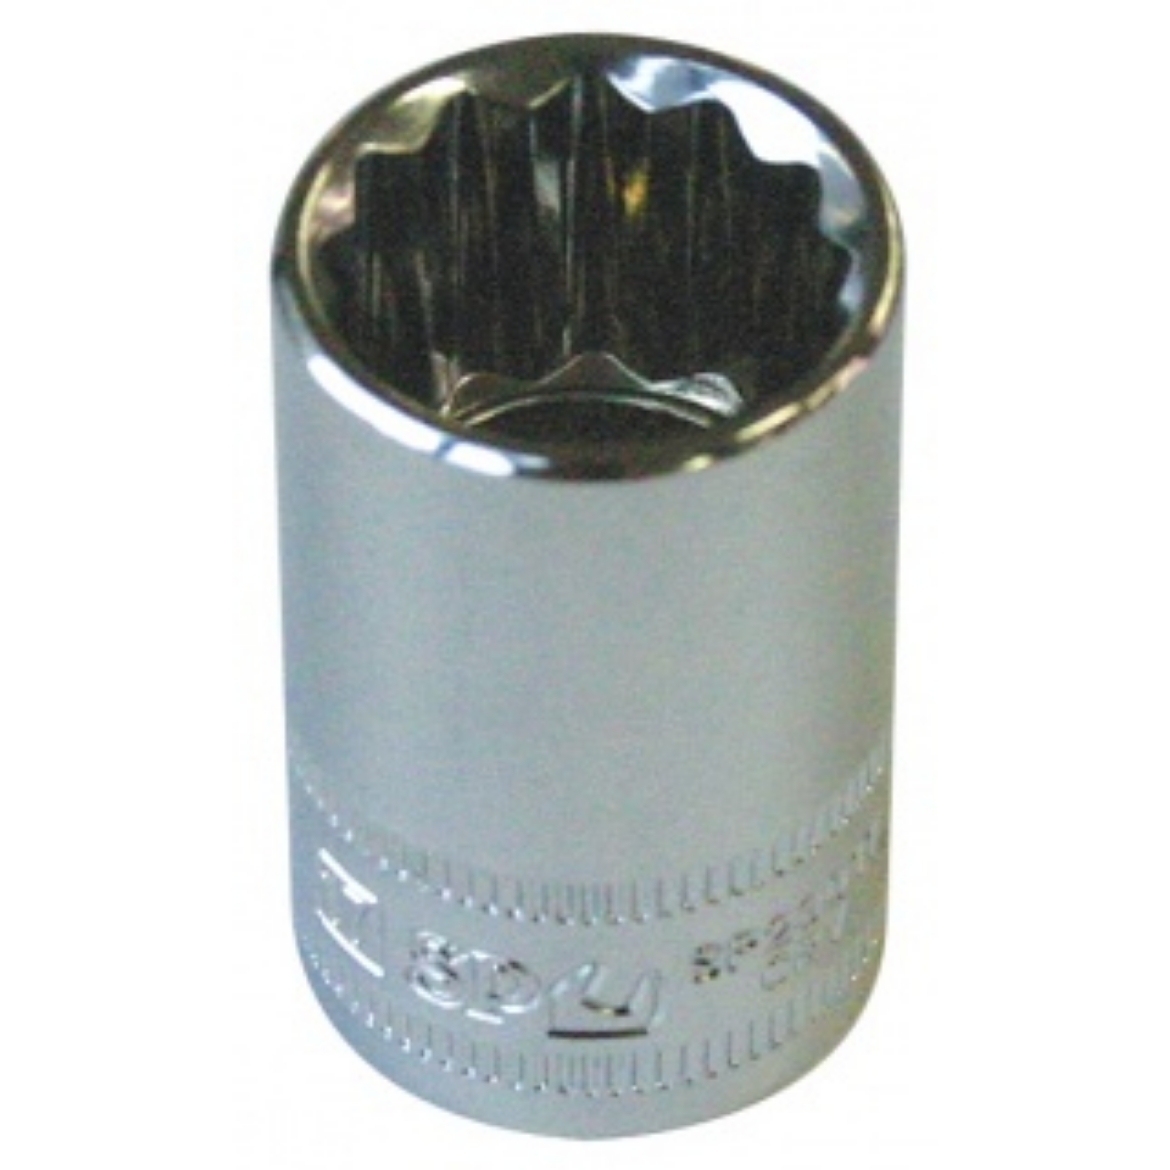 Picture of SOCKET 1/2"DR 12PT METRIC 25MM SP TOOLS